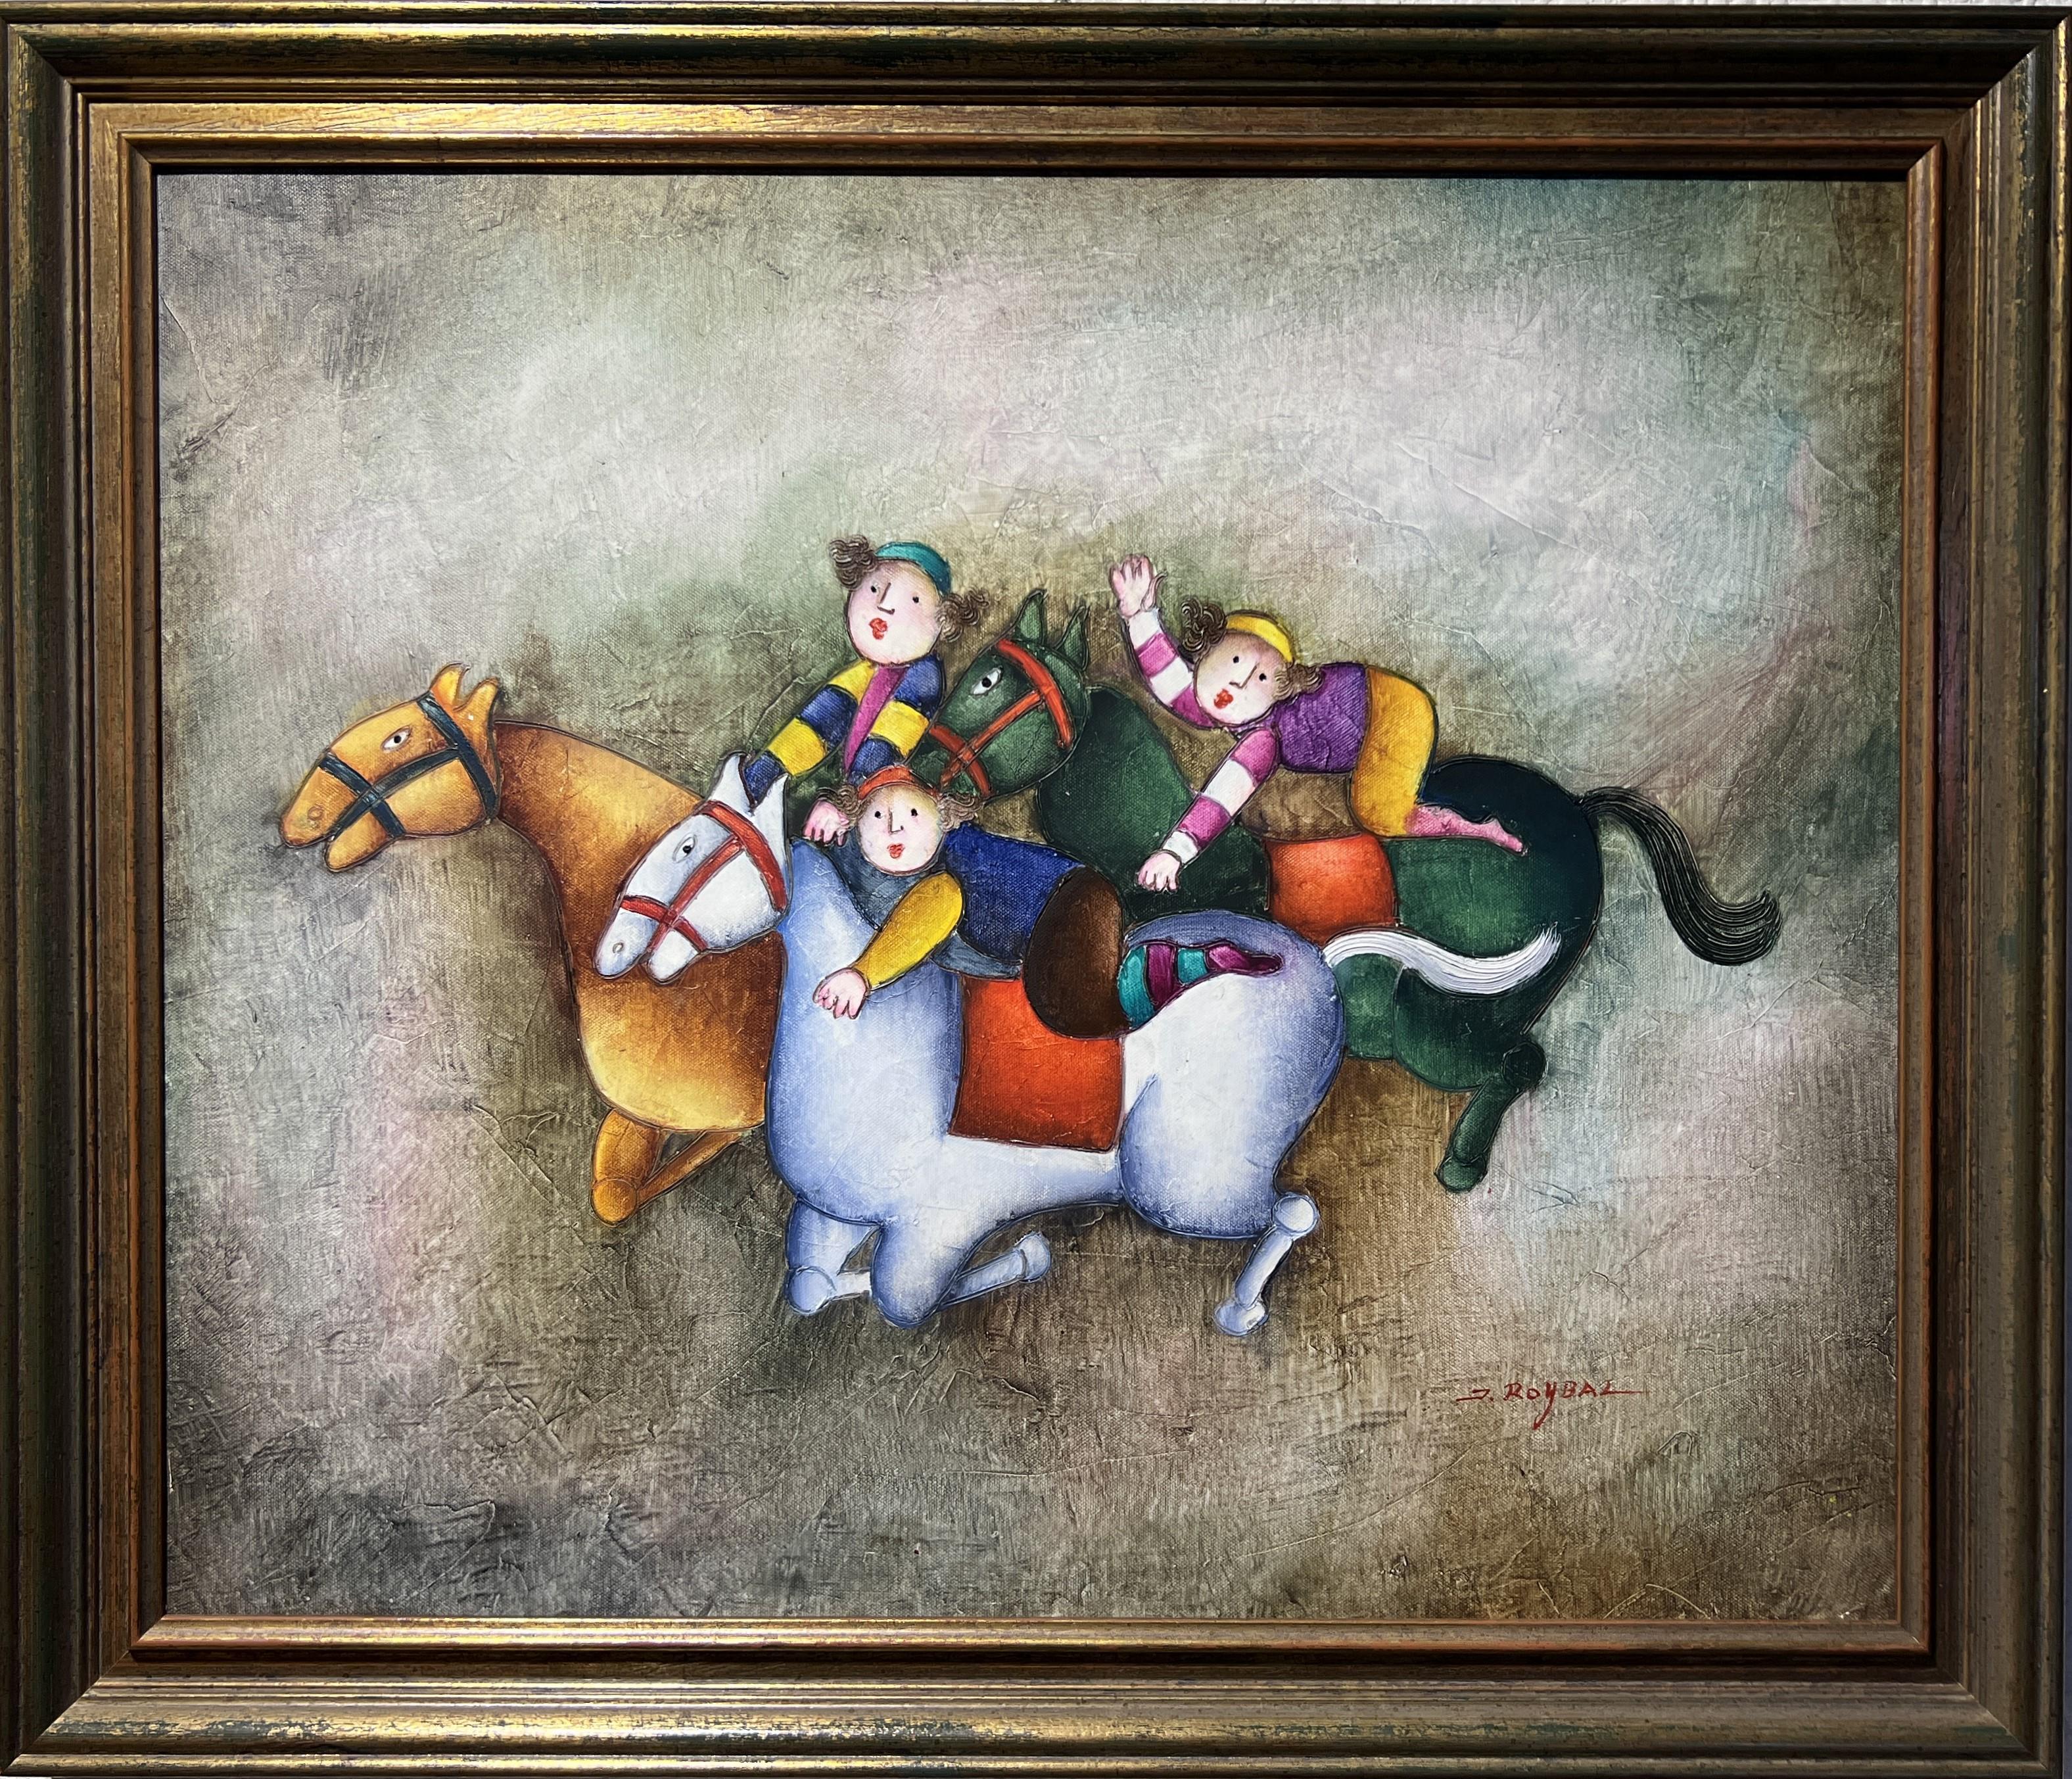 This impressive large painting on canvas by Joyce Roybal. Joyce Roybal's paintings are lighthearted and almost cartoonish, using bright, textured colors and geometric shapes. The perfectly symmetrical faces of the children in his paintings and their